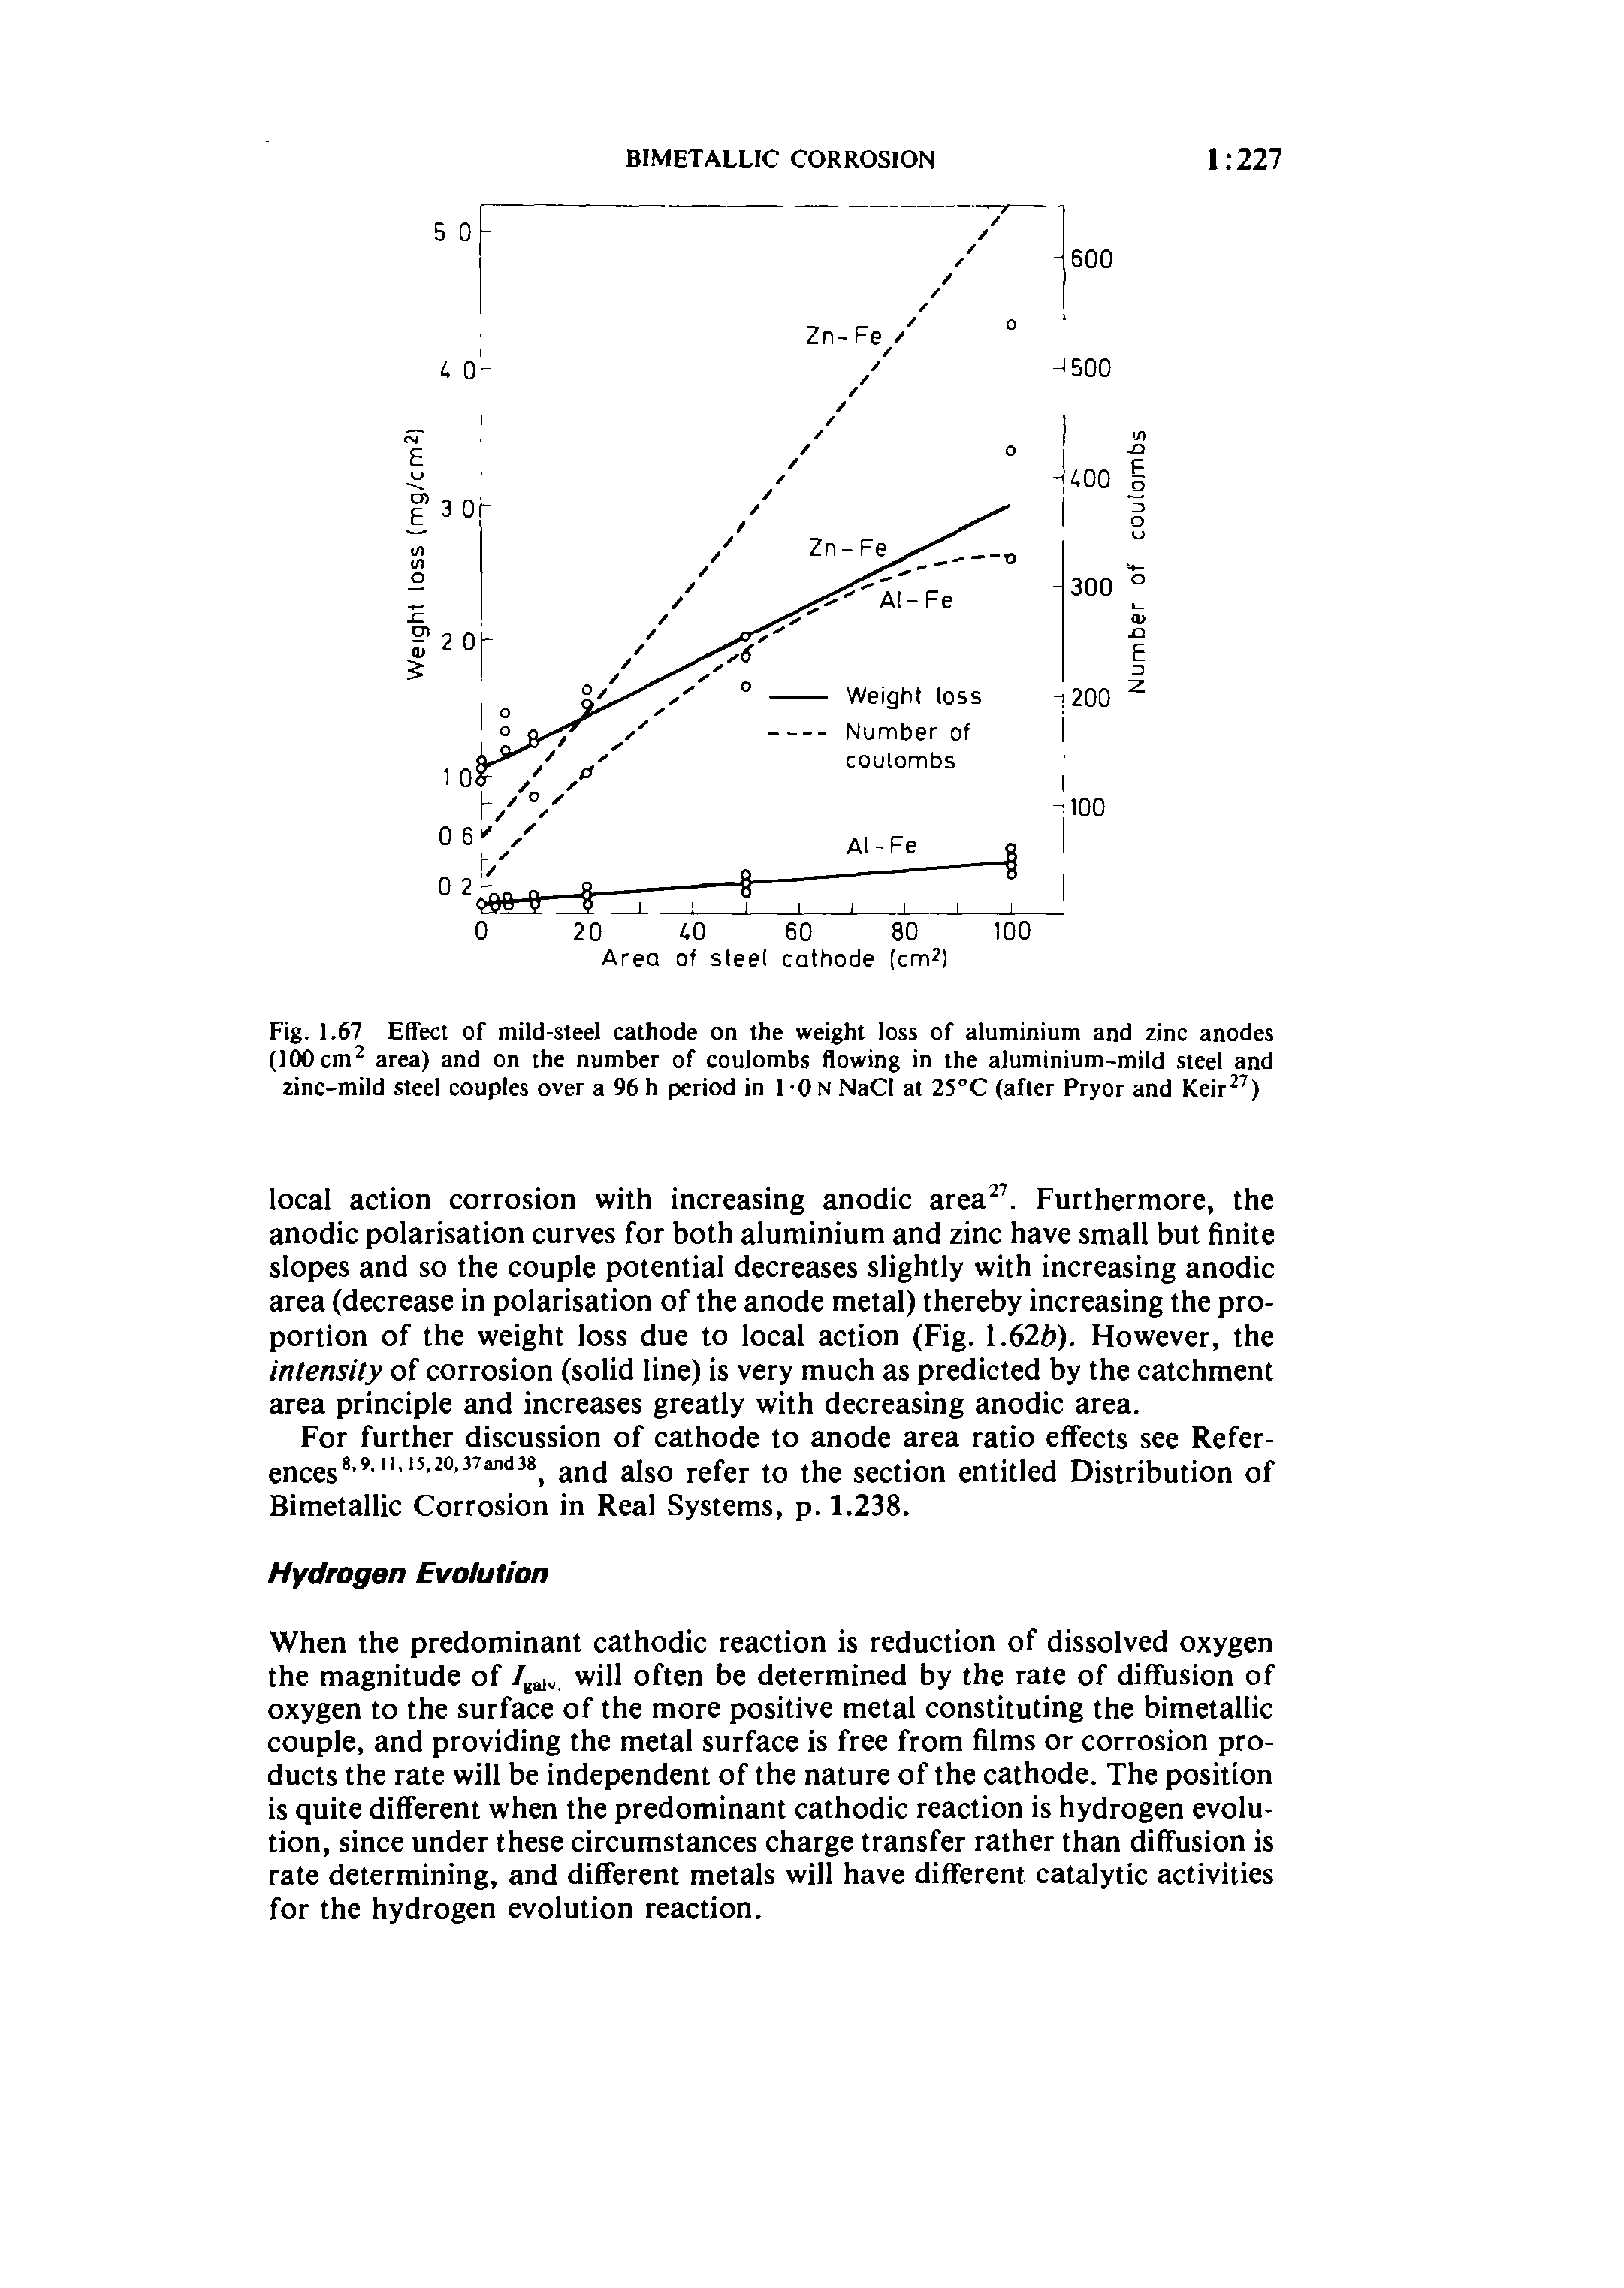 Fig. 1.67 Effect of mild-steel cathode on the weight loss of aluminium and zinc anodes (100 cm area) and on the number of coulombs flowing in the aluminium-mild steel and zinc-mild steel couples over a 96 h period in 1 -0 n NaCl at 25°C (after Pryor and Keir )...